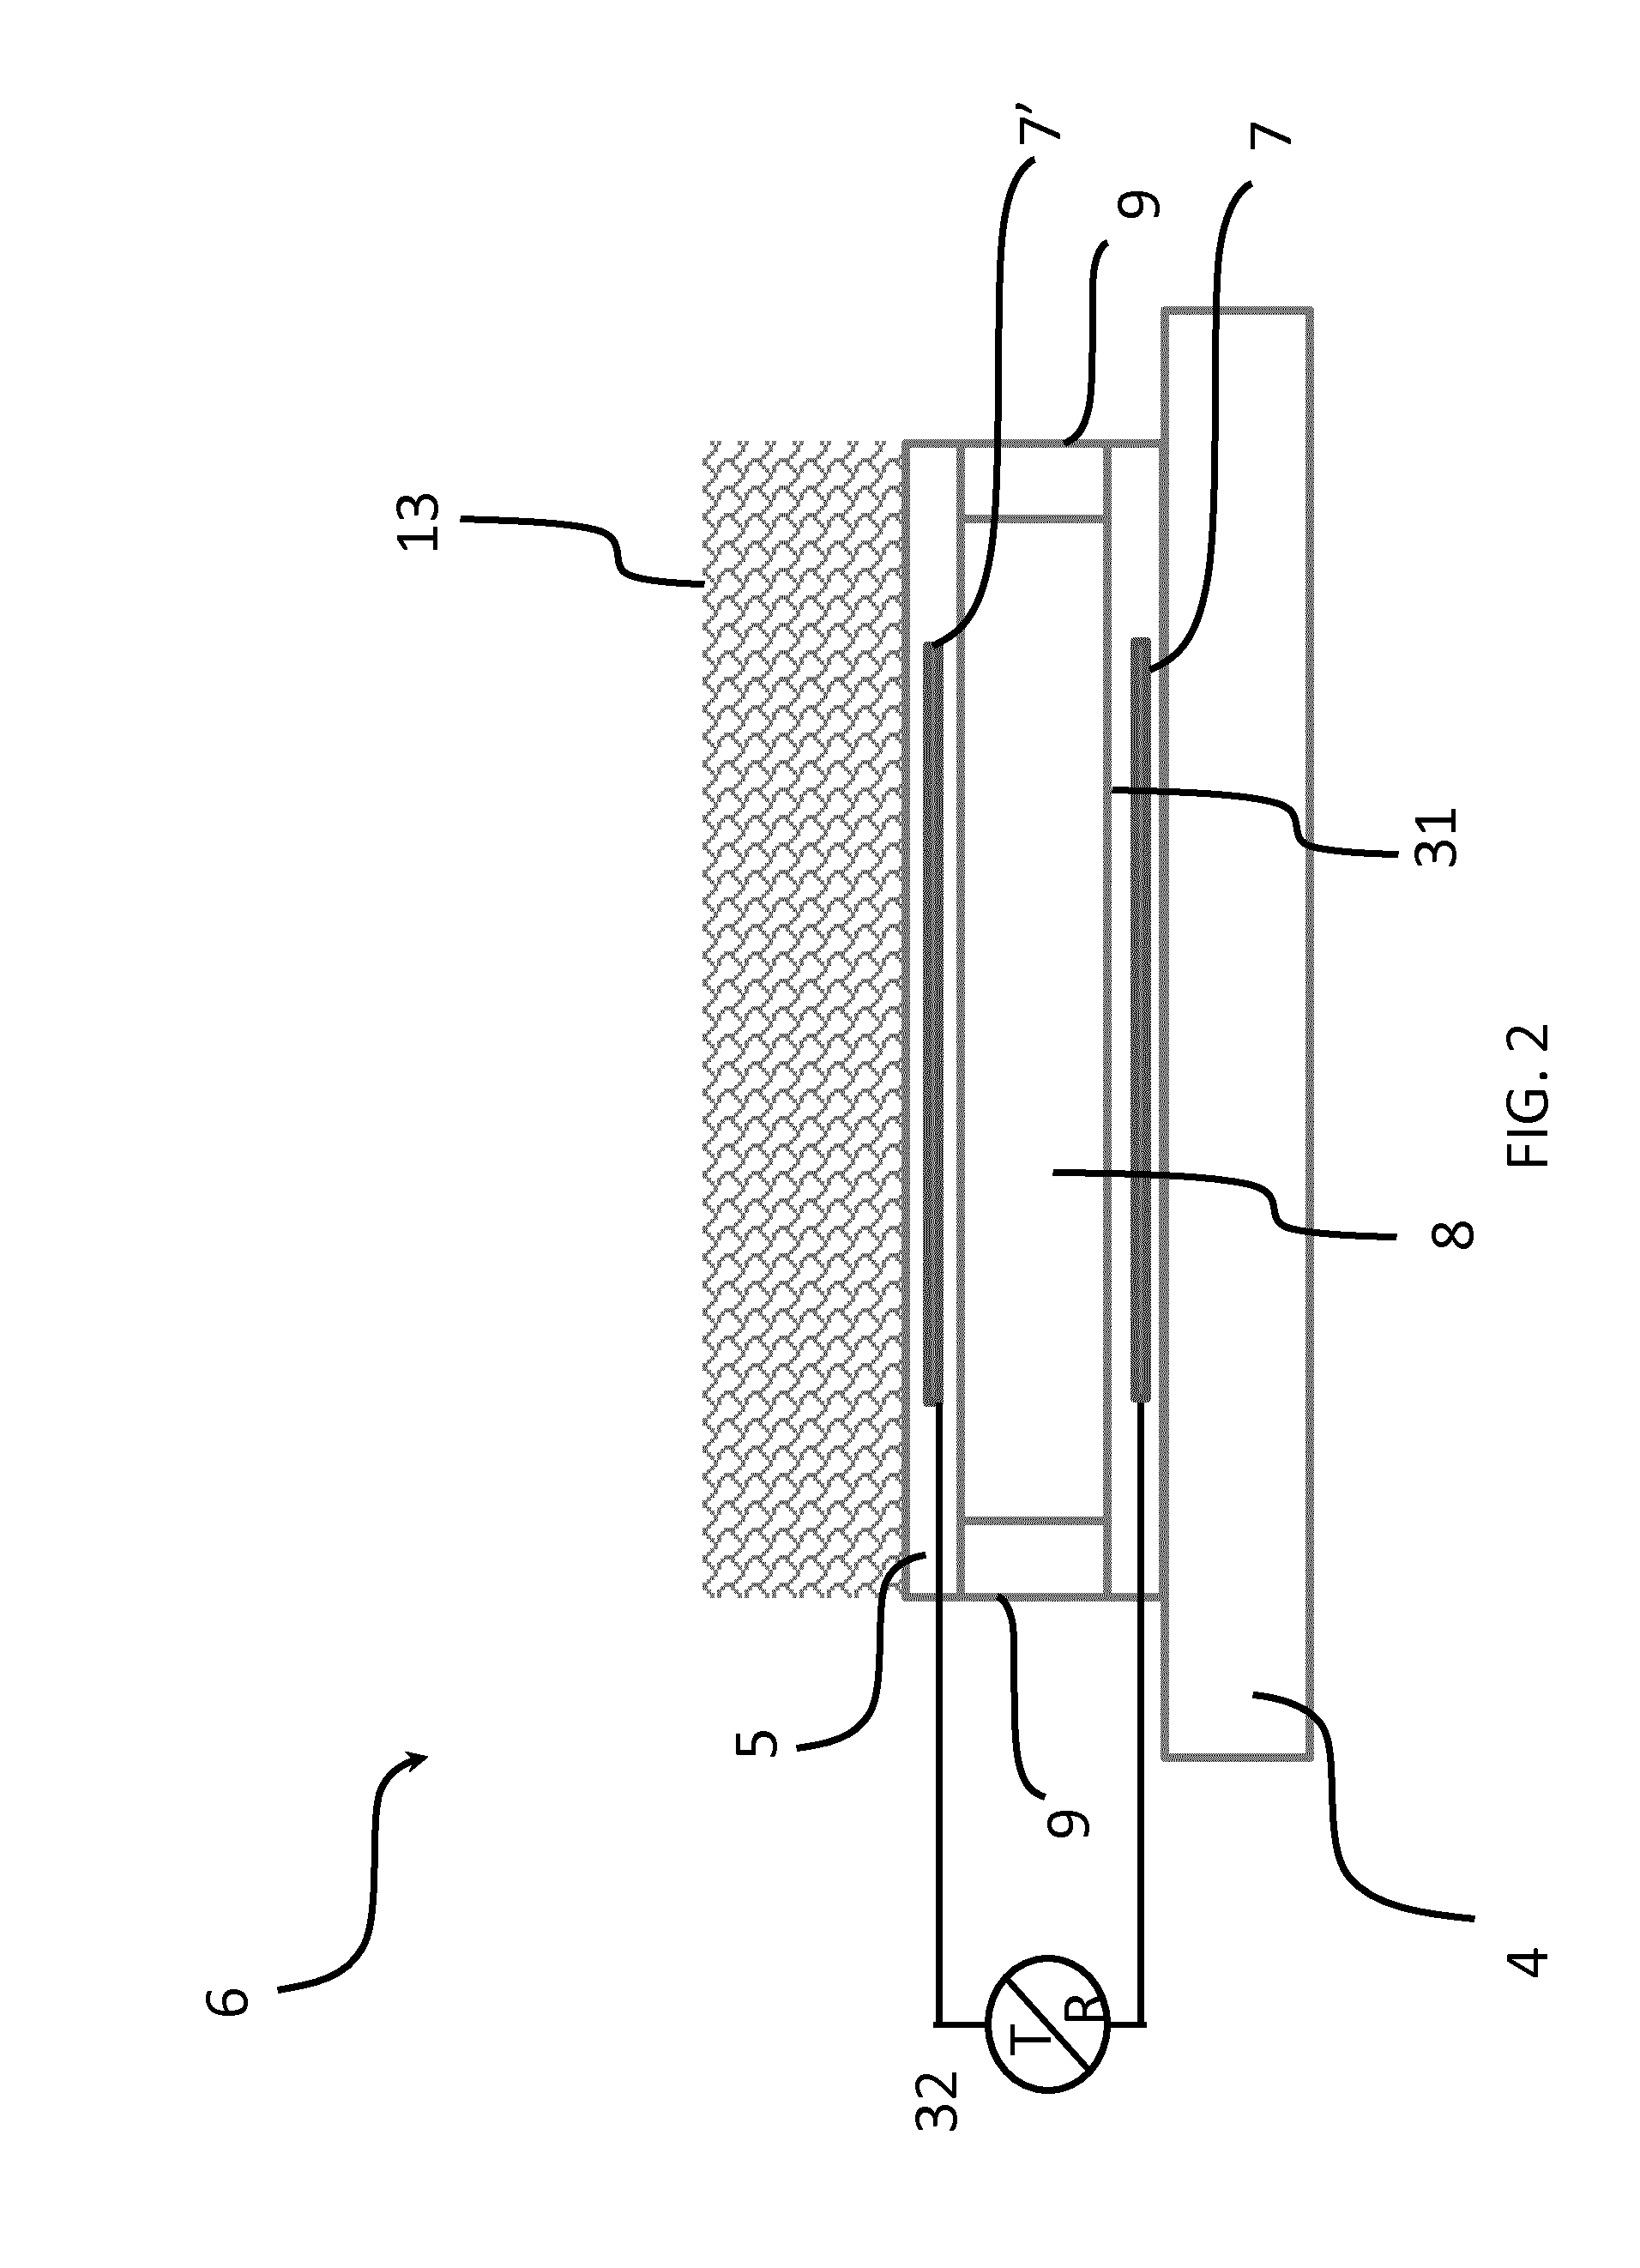 Capacitive micro-machined ultrasound transducer cell